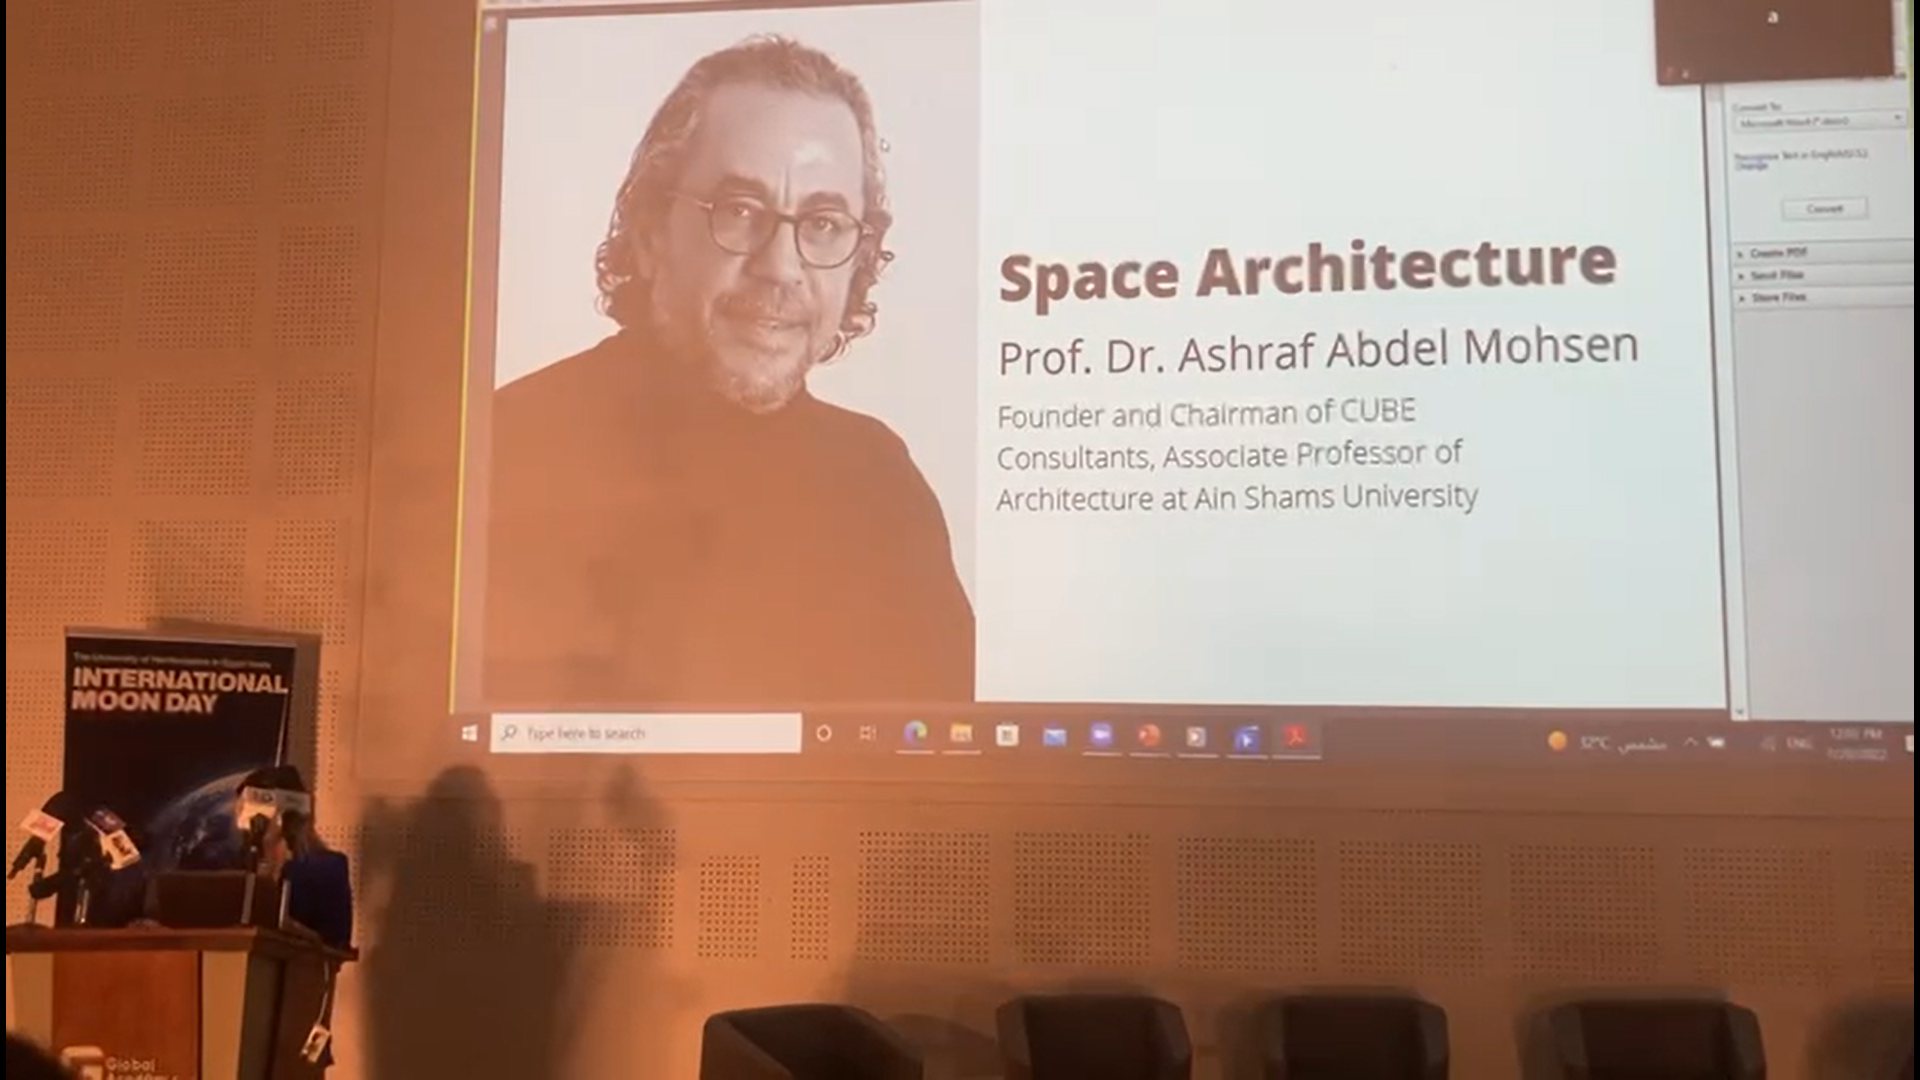 Prof Dr. Ashraf Abdel Mohsen has been selected as Space Architecture Ambassador